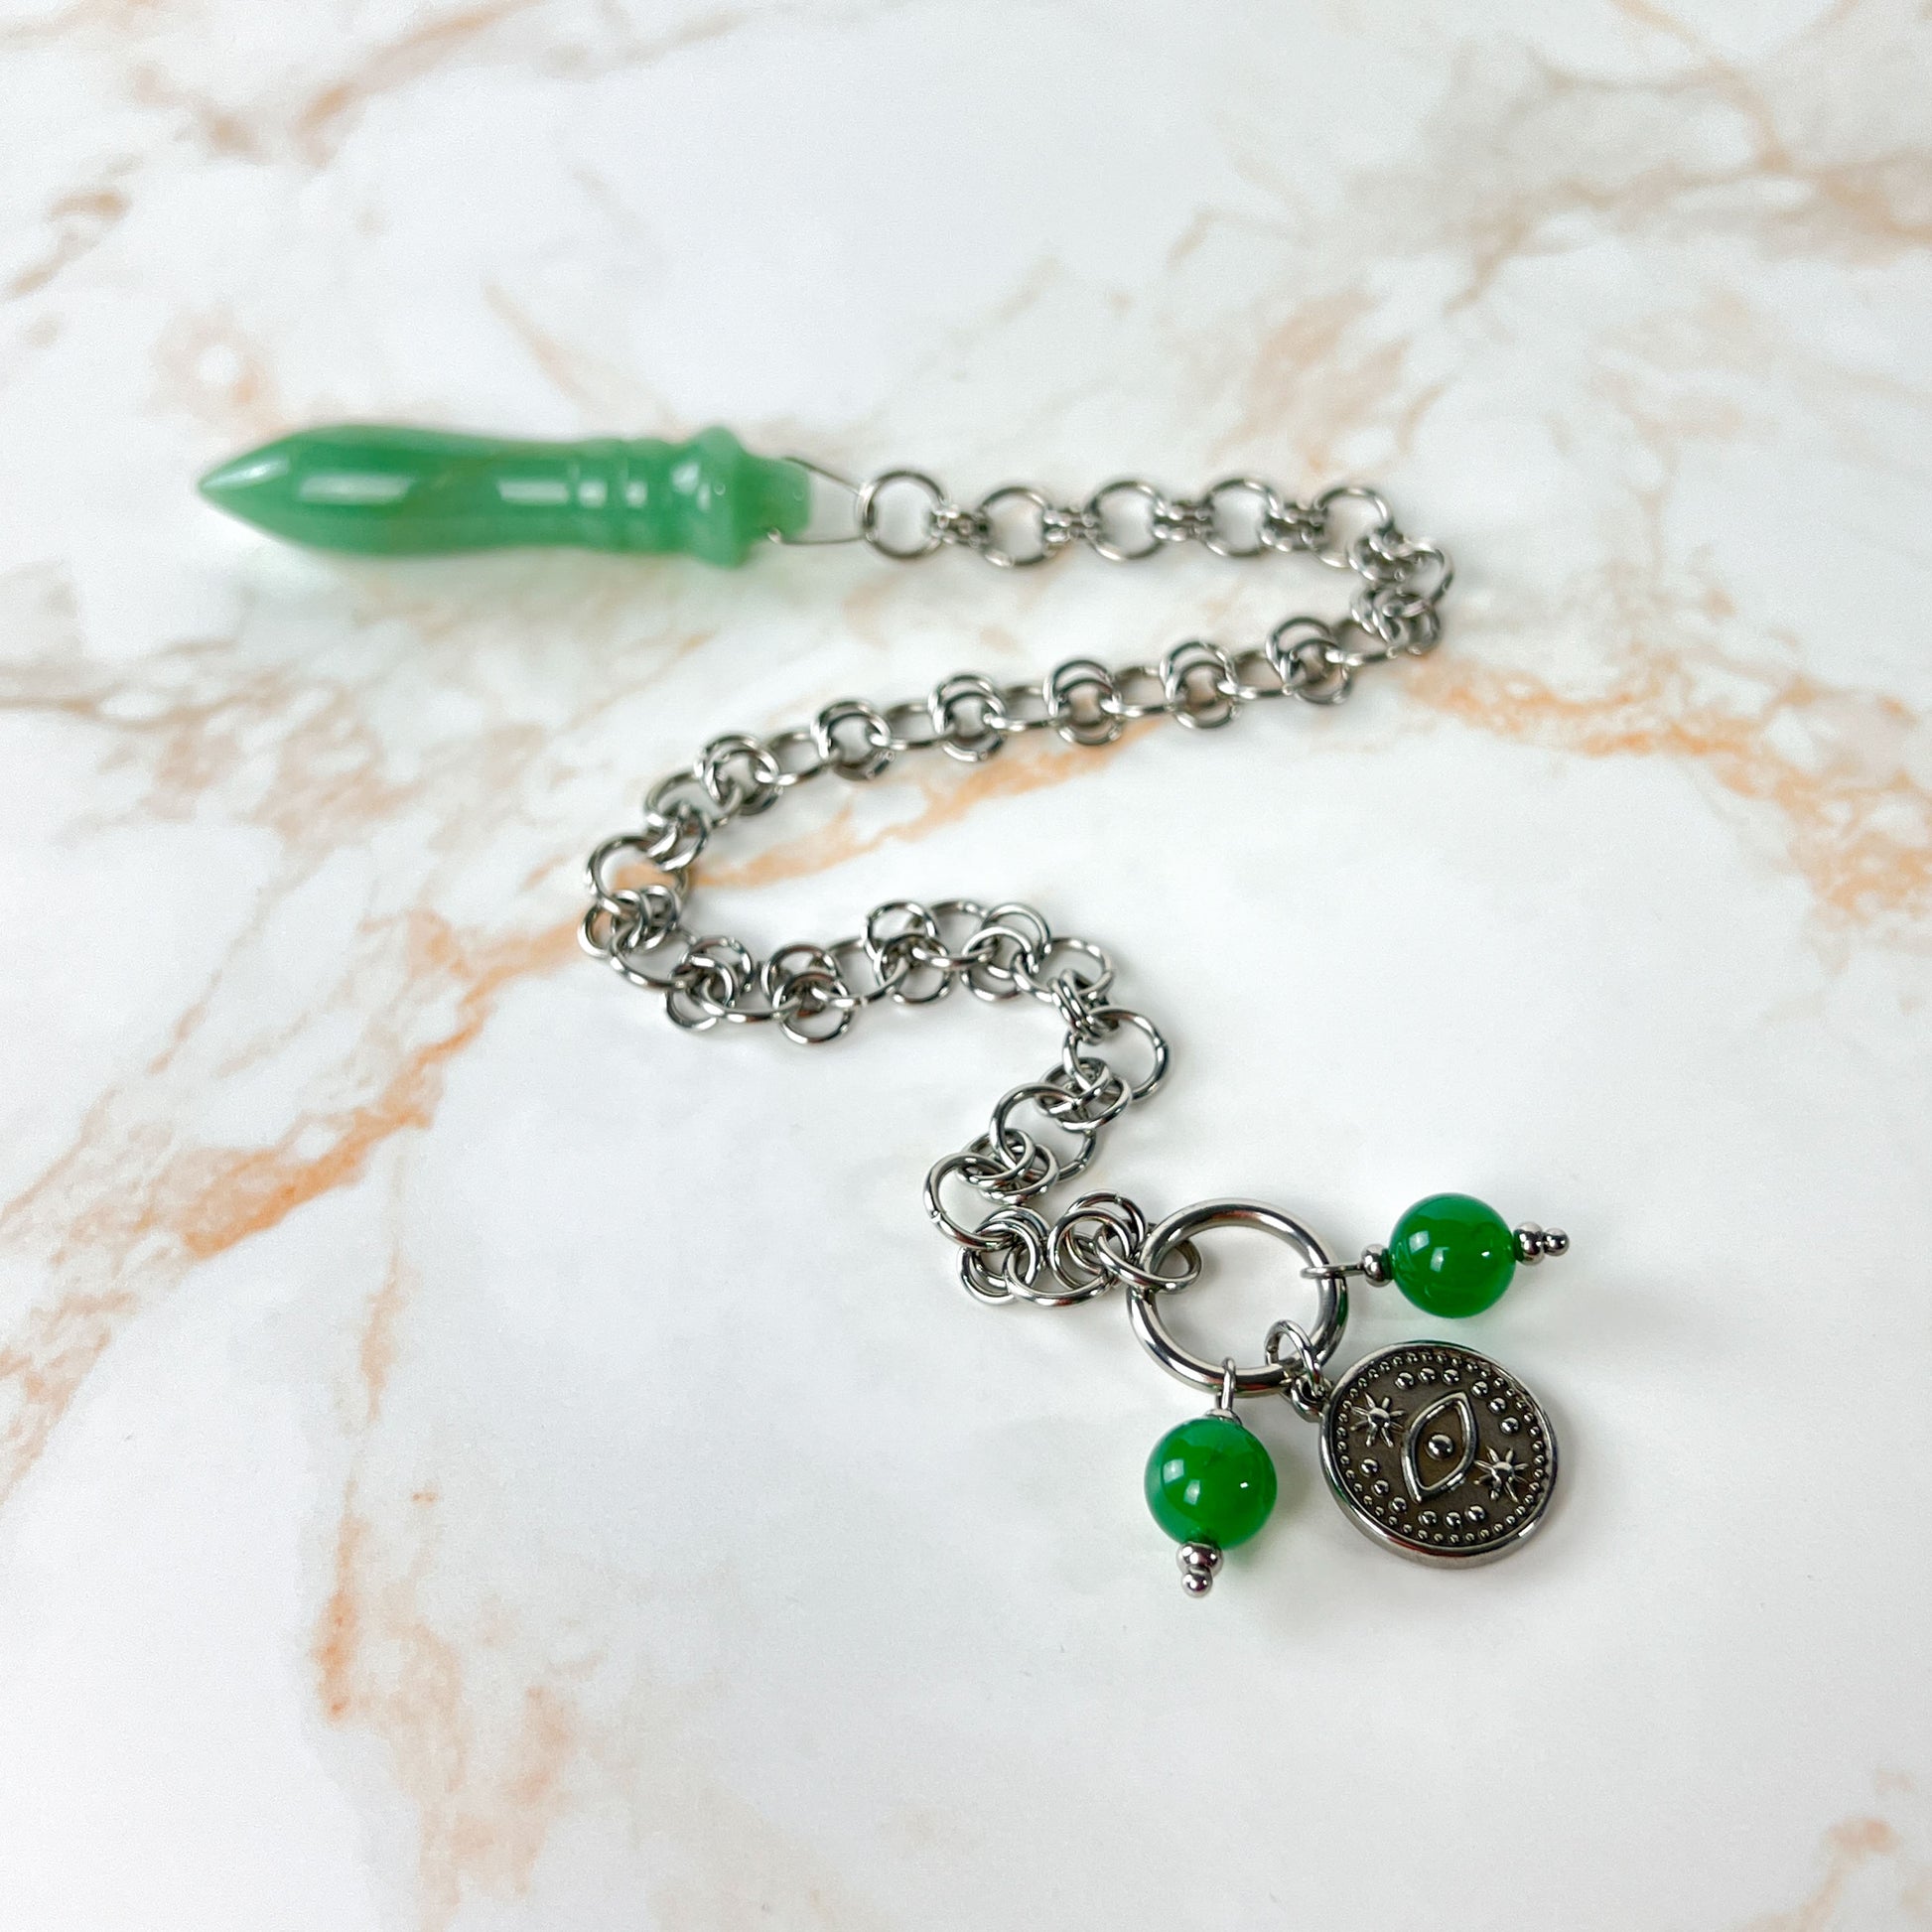 Egyptian Thot pendulum aventurine chainmail, third eye charm and stainless steel Baguette Magick